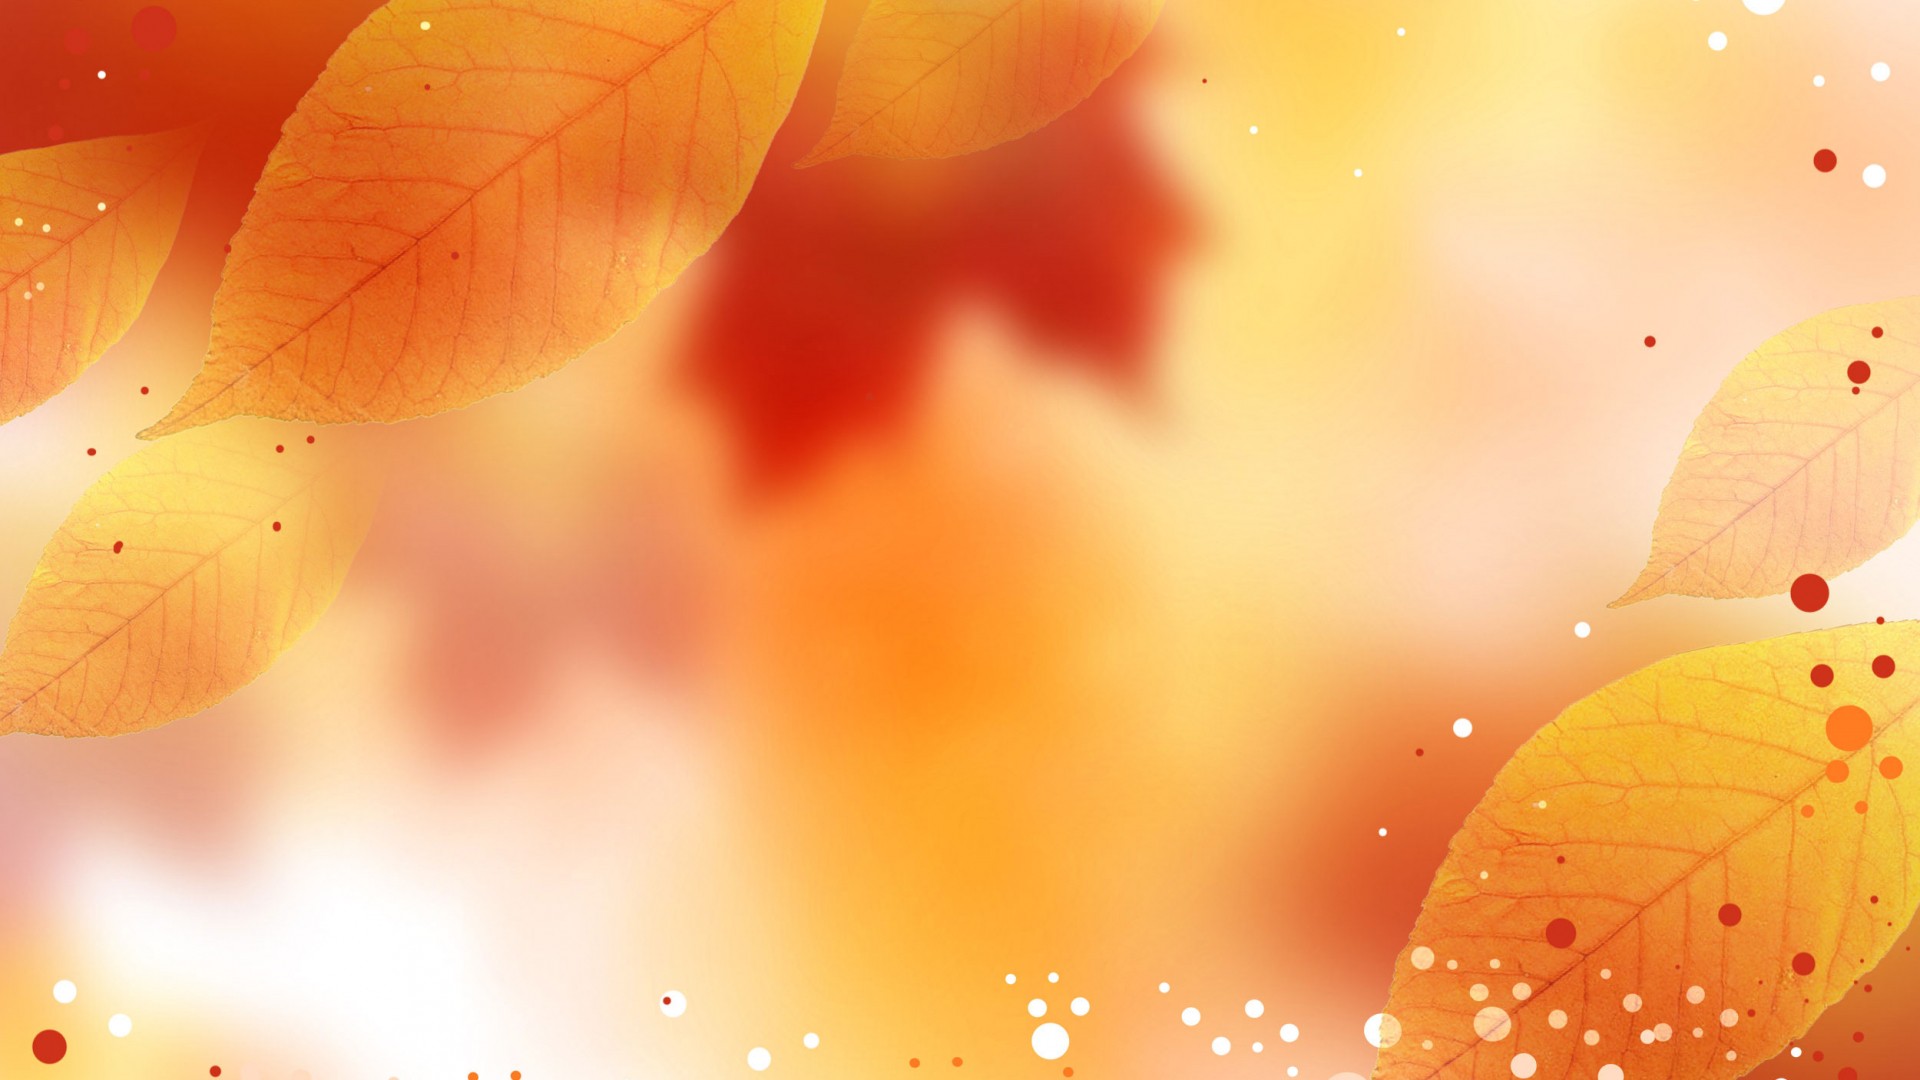 Abstract Leaves free background